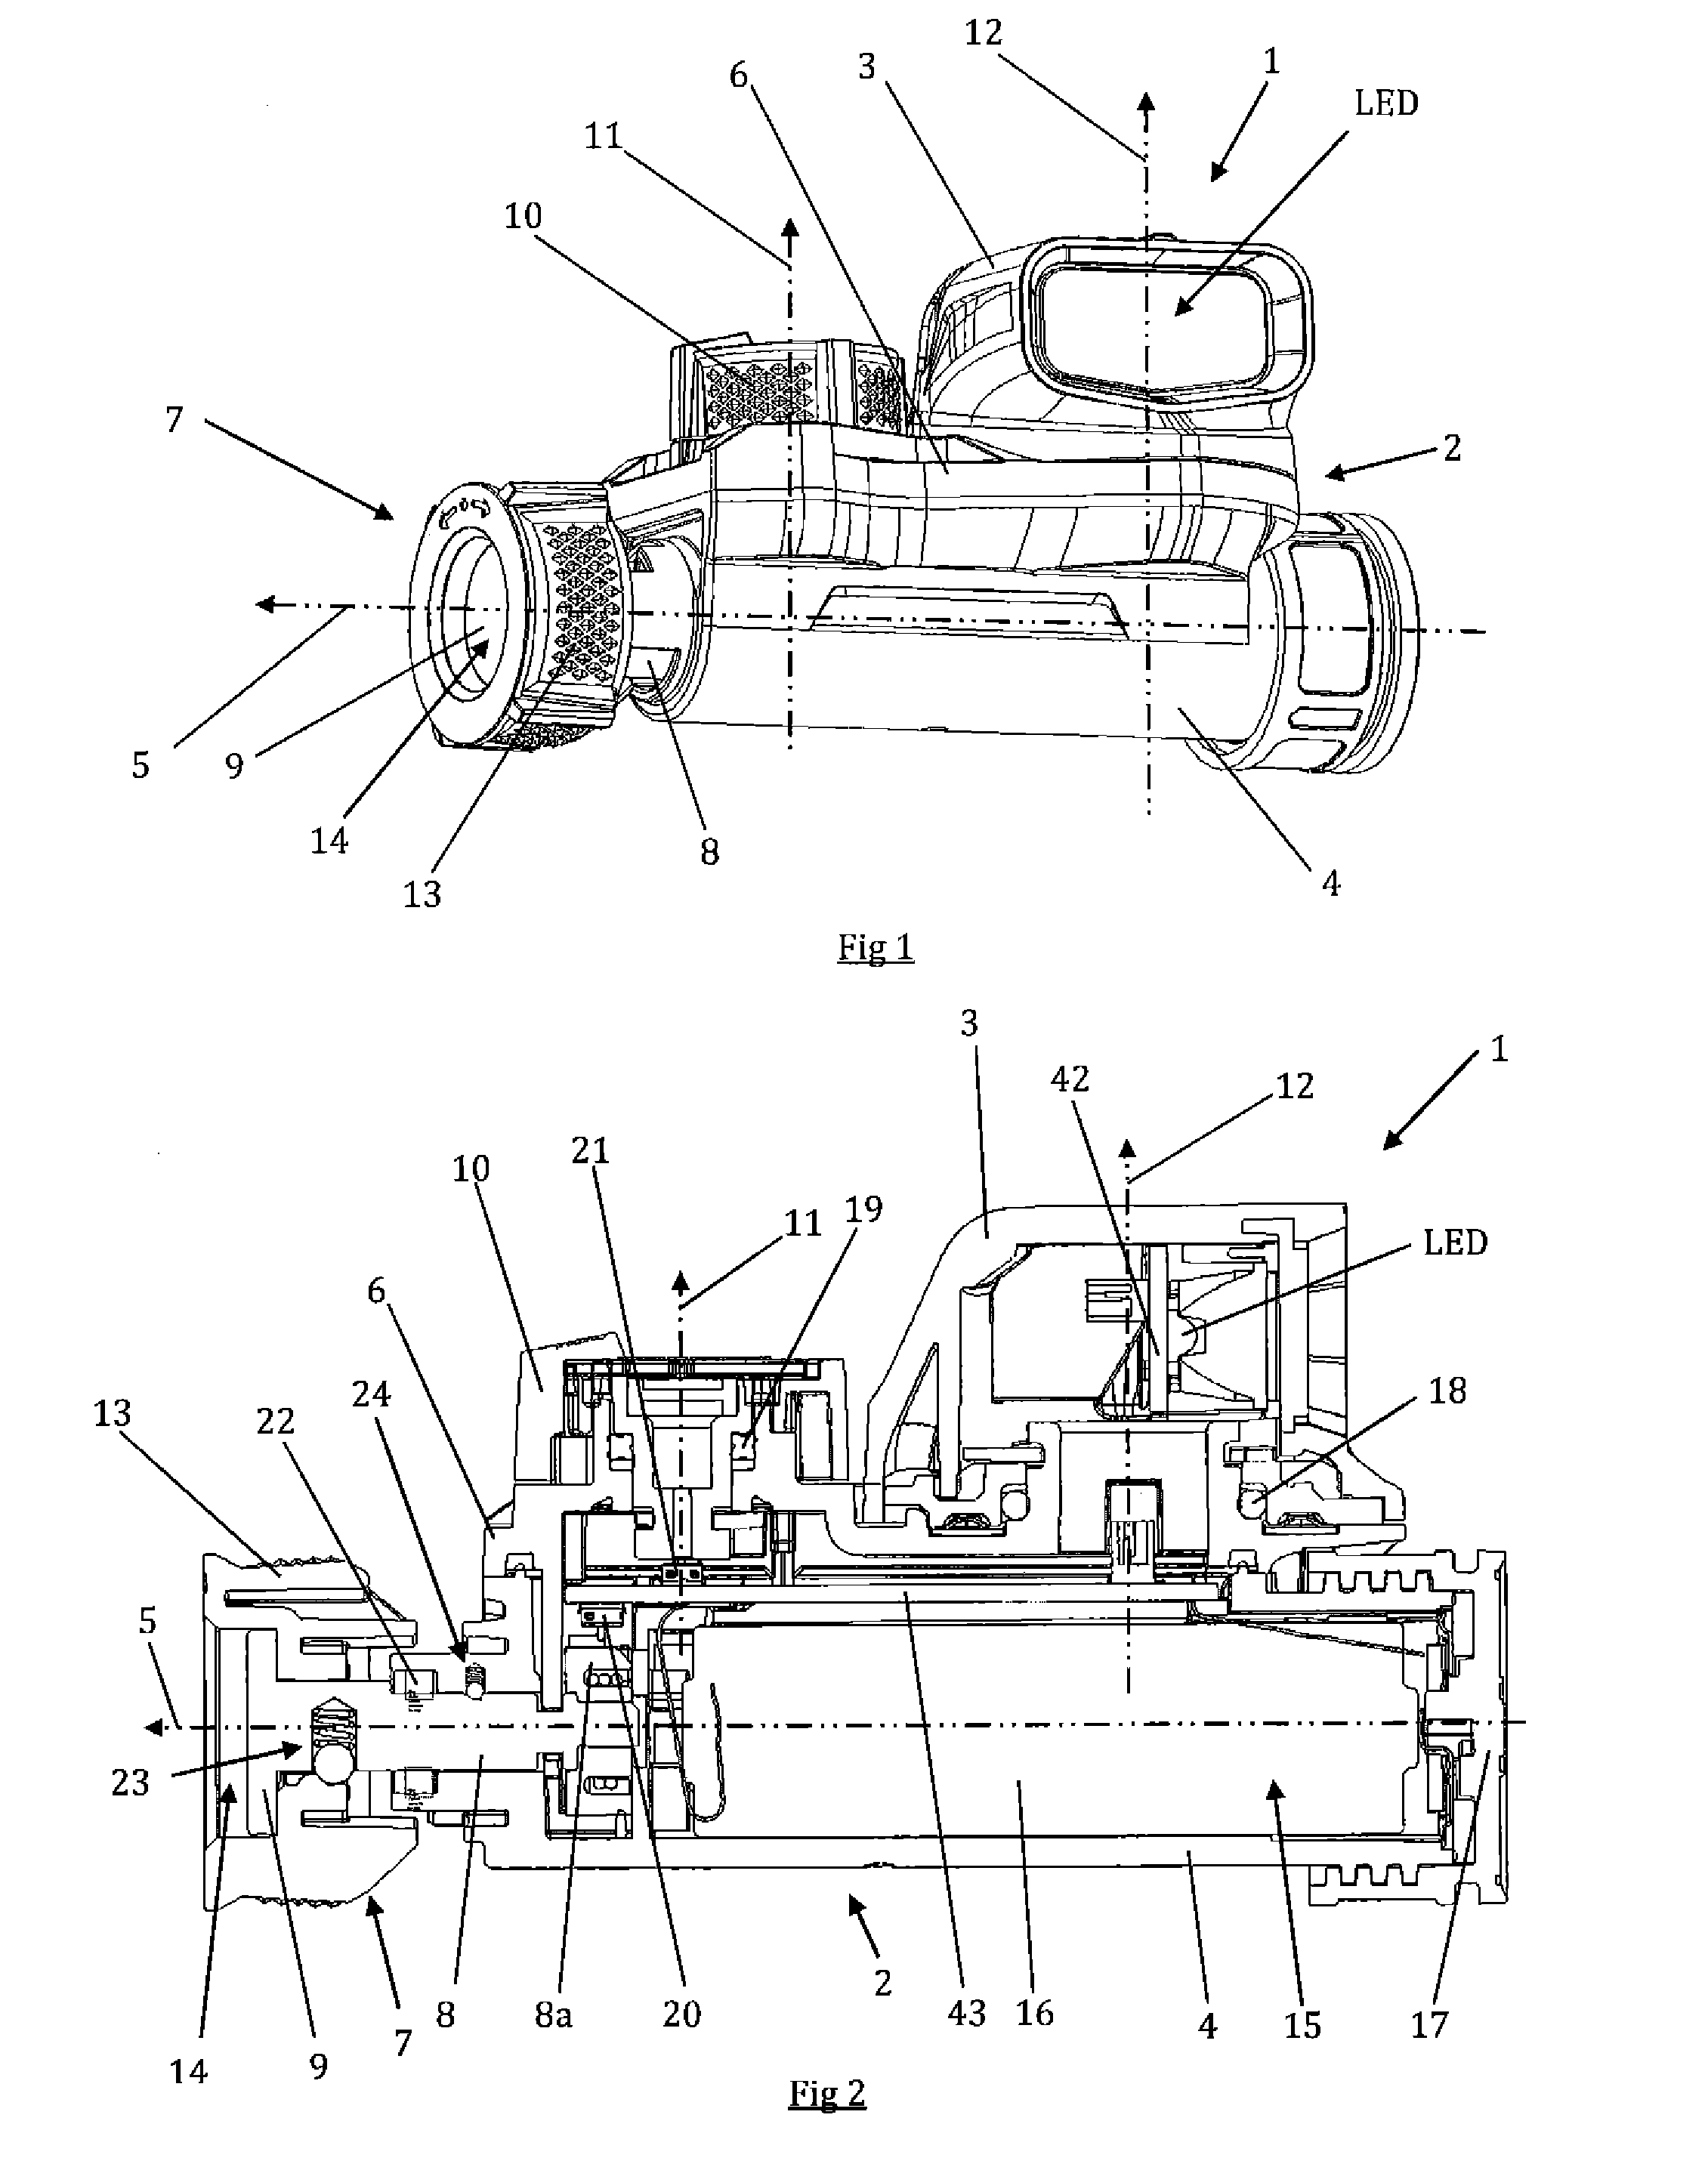 Portable electric lamp with a compact casing housing a lighting module controlled by a rotary actuator